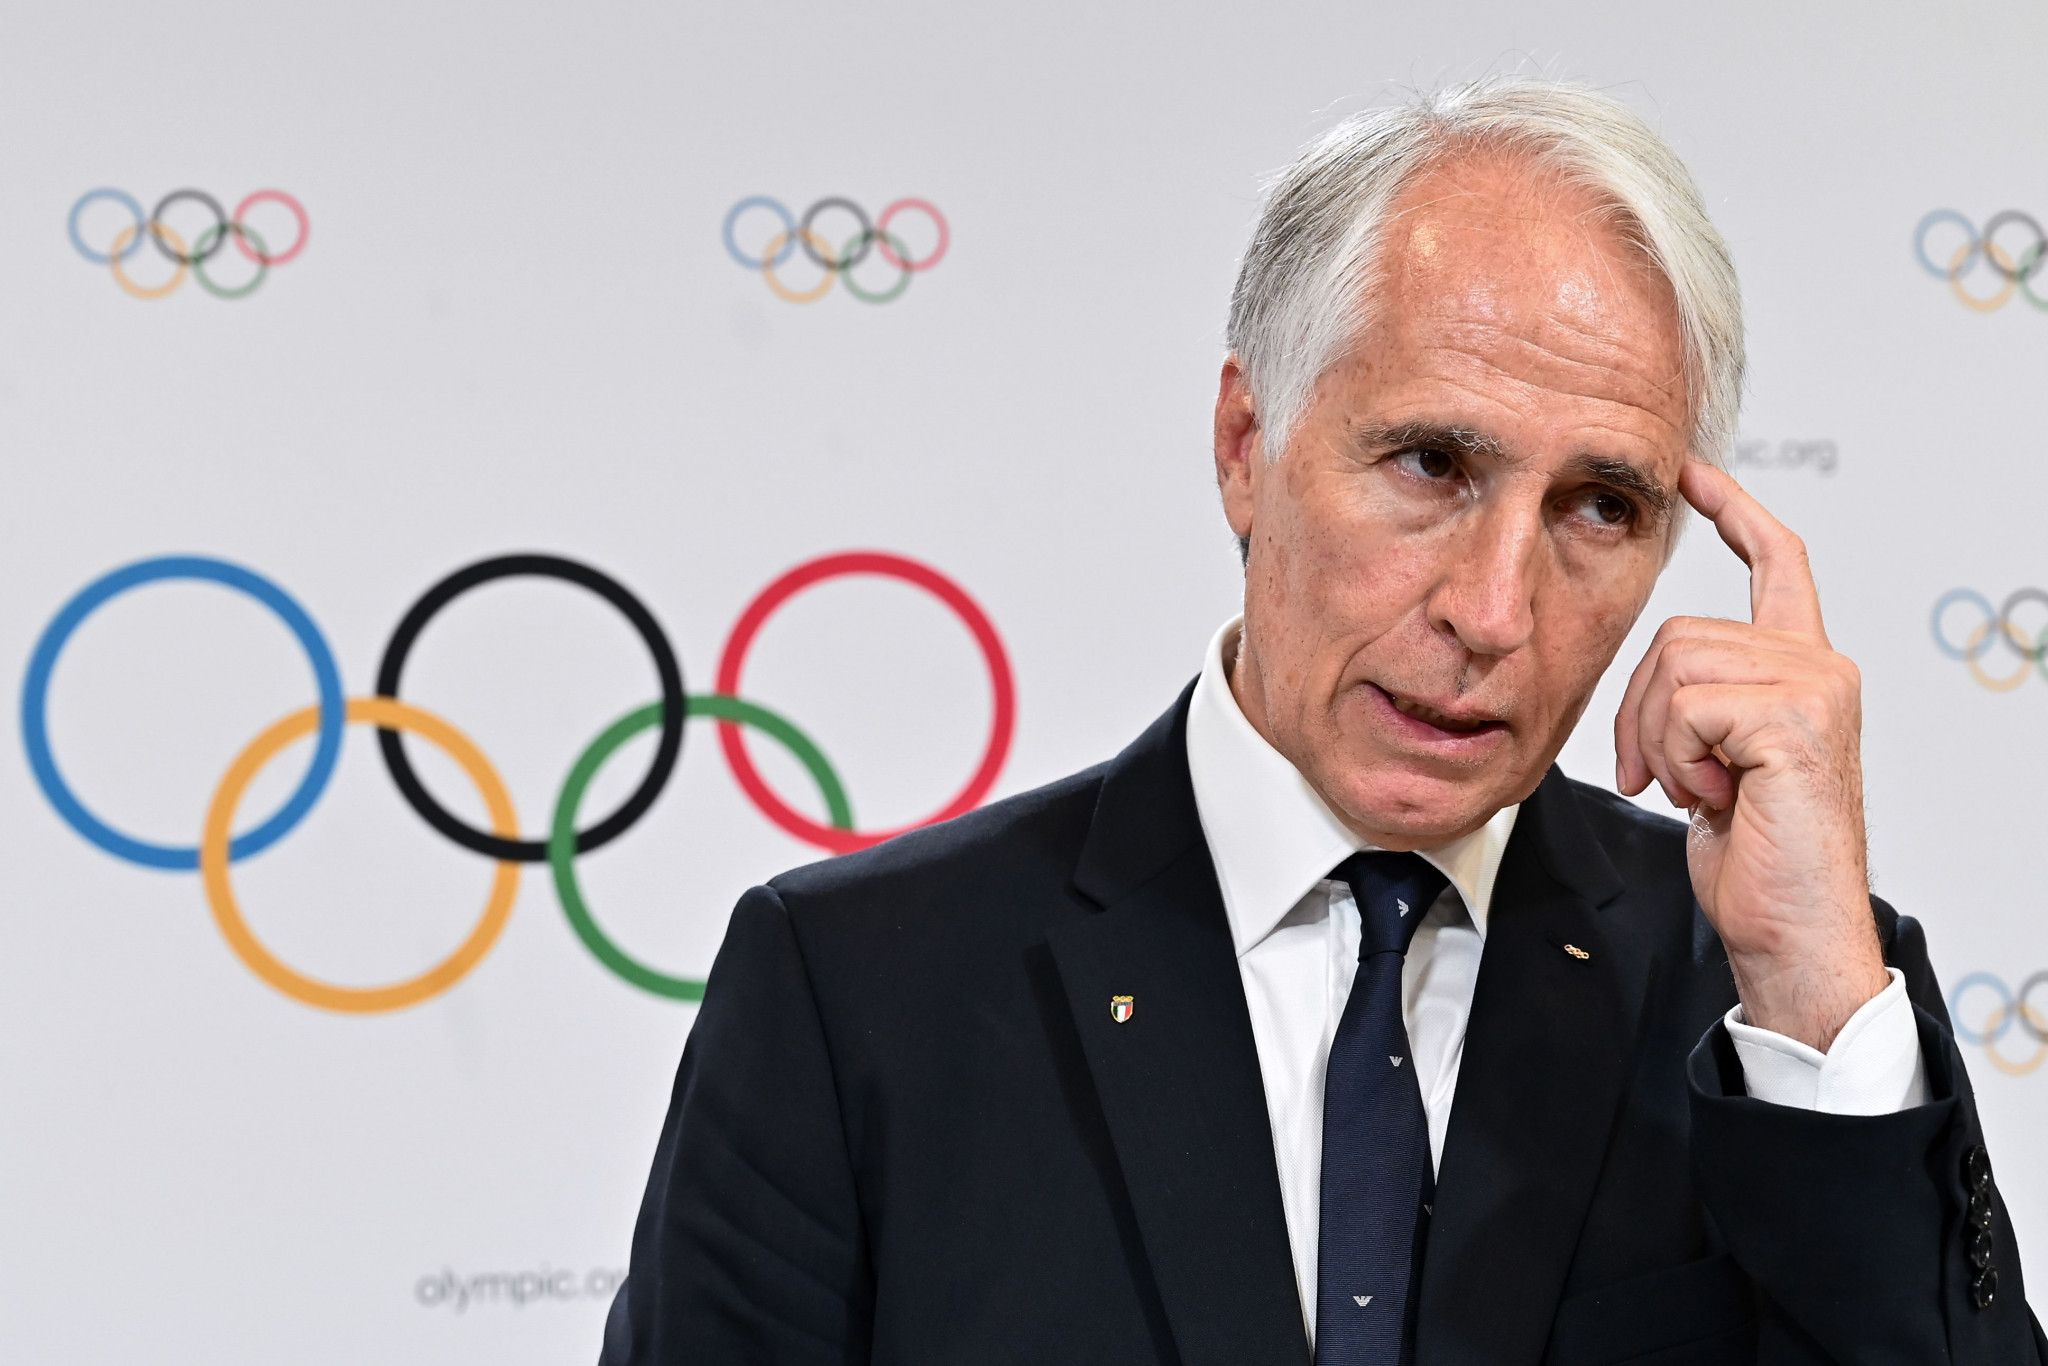 Three Five Star politicians call for Malagò to step aside from CONI and Milan Cortina 2026 roles